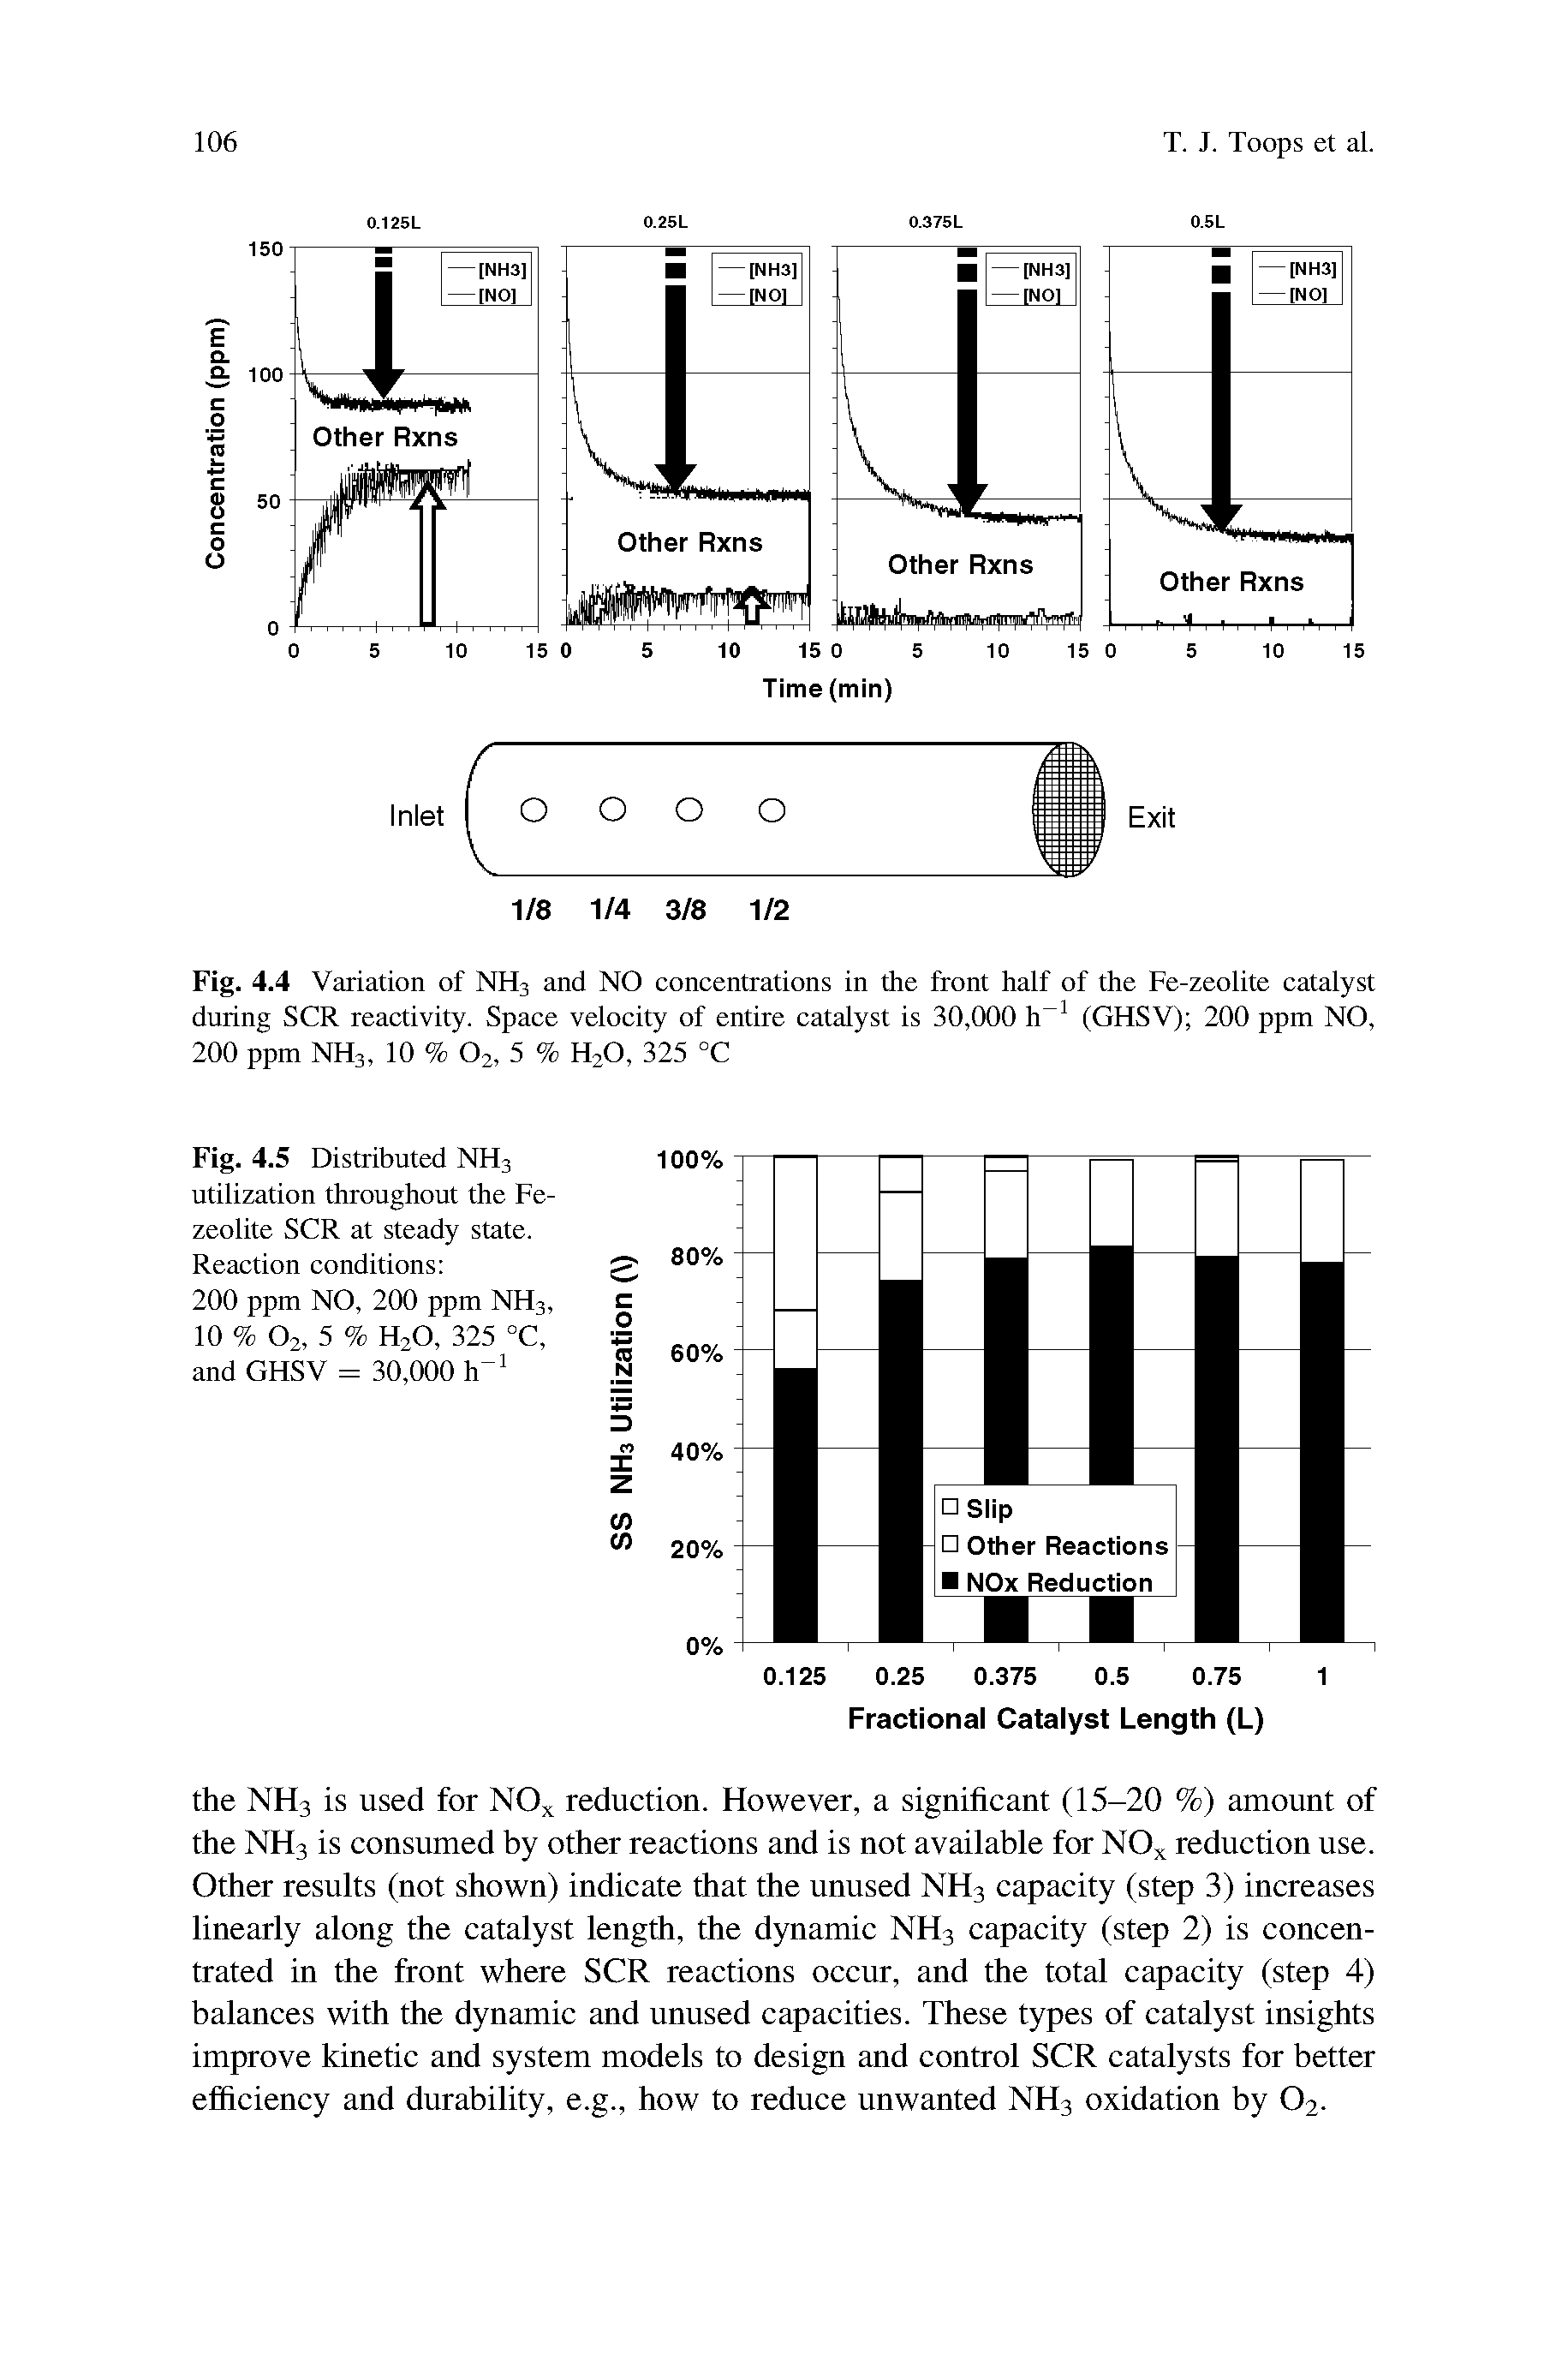 Fig. 4.4 Variation of NH3 and NO concentrations in the front half of the Fe-zeolite catalyst during SCR reactivity. Space velocity of entire catalyst is 30,000 h (GHSV) 200 ppm NO, 200 ppm NH3, 10 % O2, 5 % H2O, 325 °C...